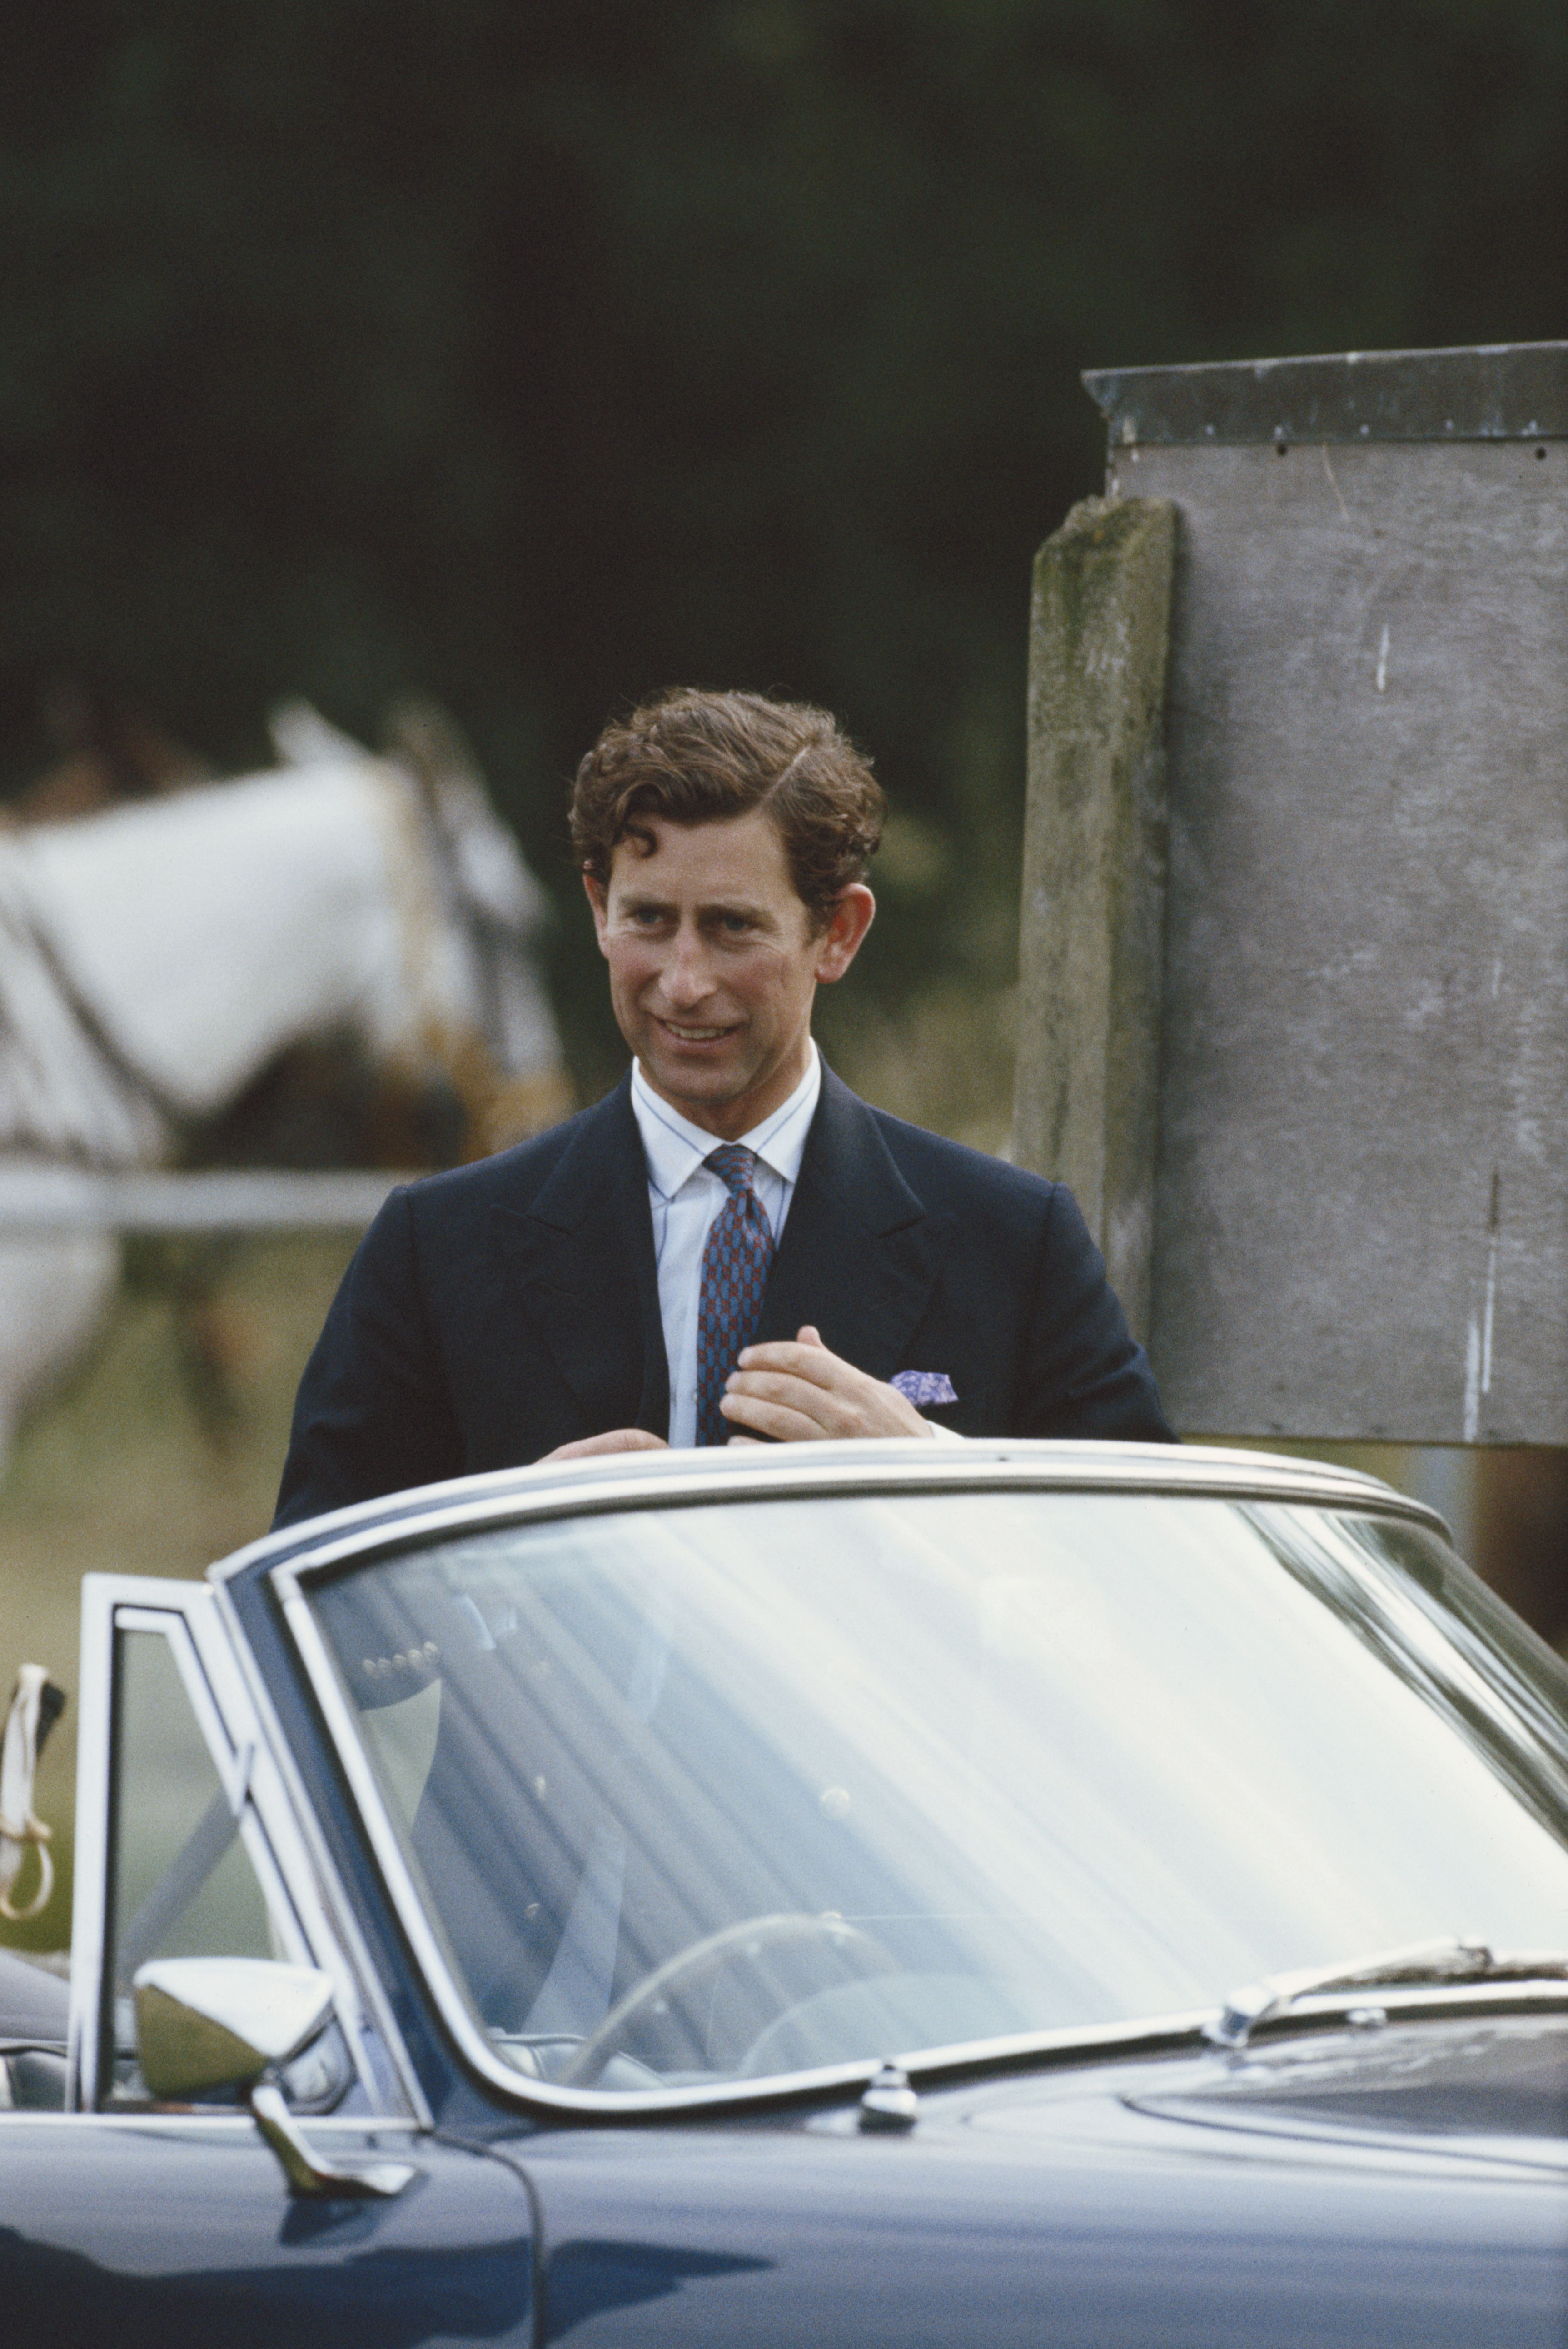 Prince Charles with his Aston Martin convertible, circa 1982. | Source: Georges De Keerle/Getty Images